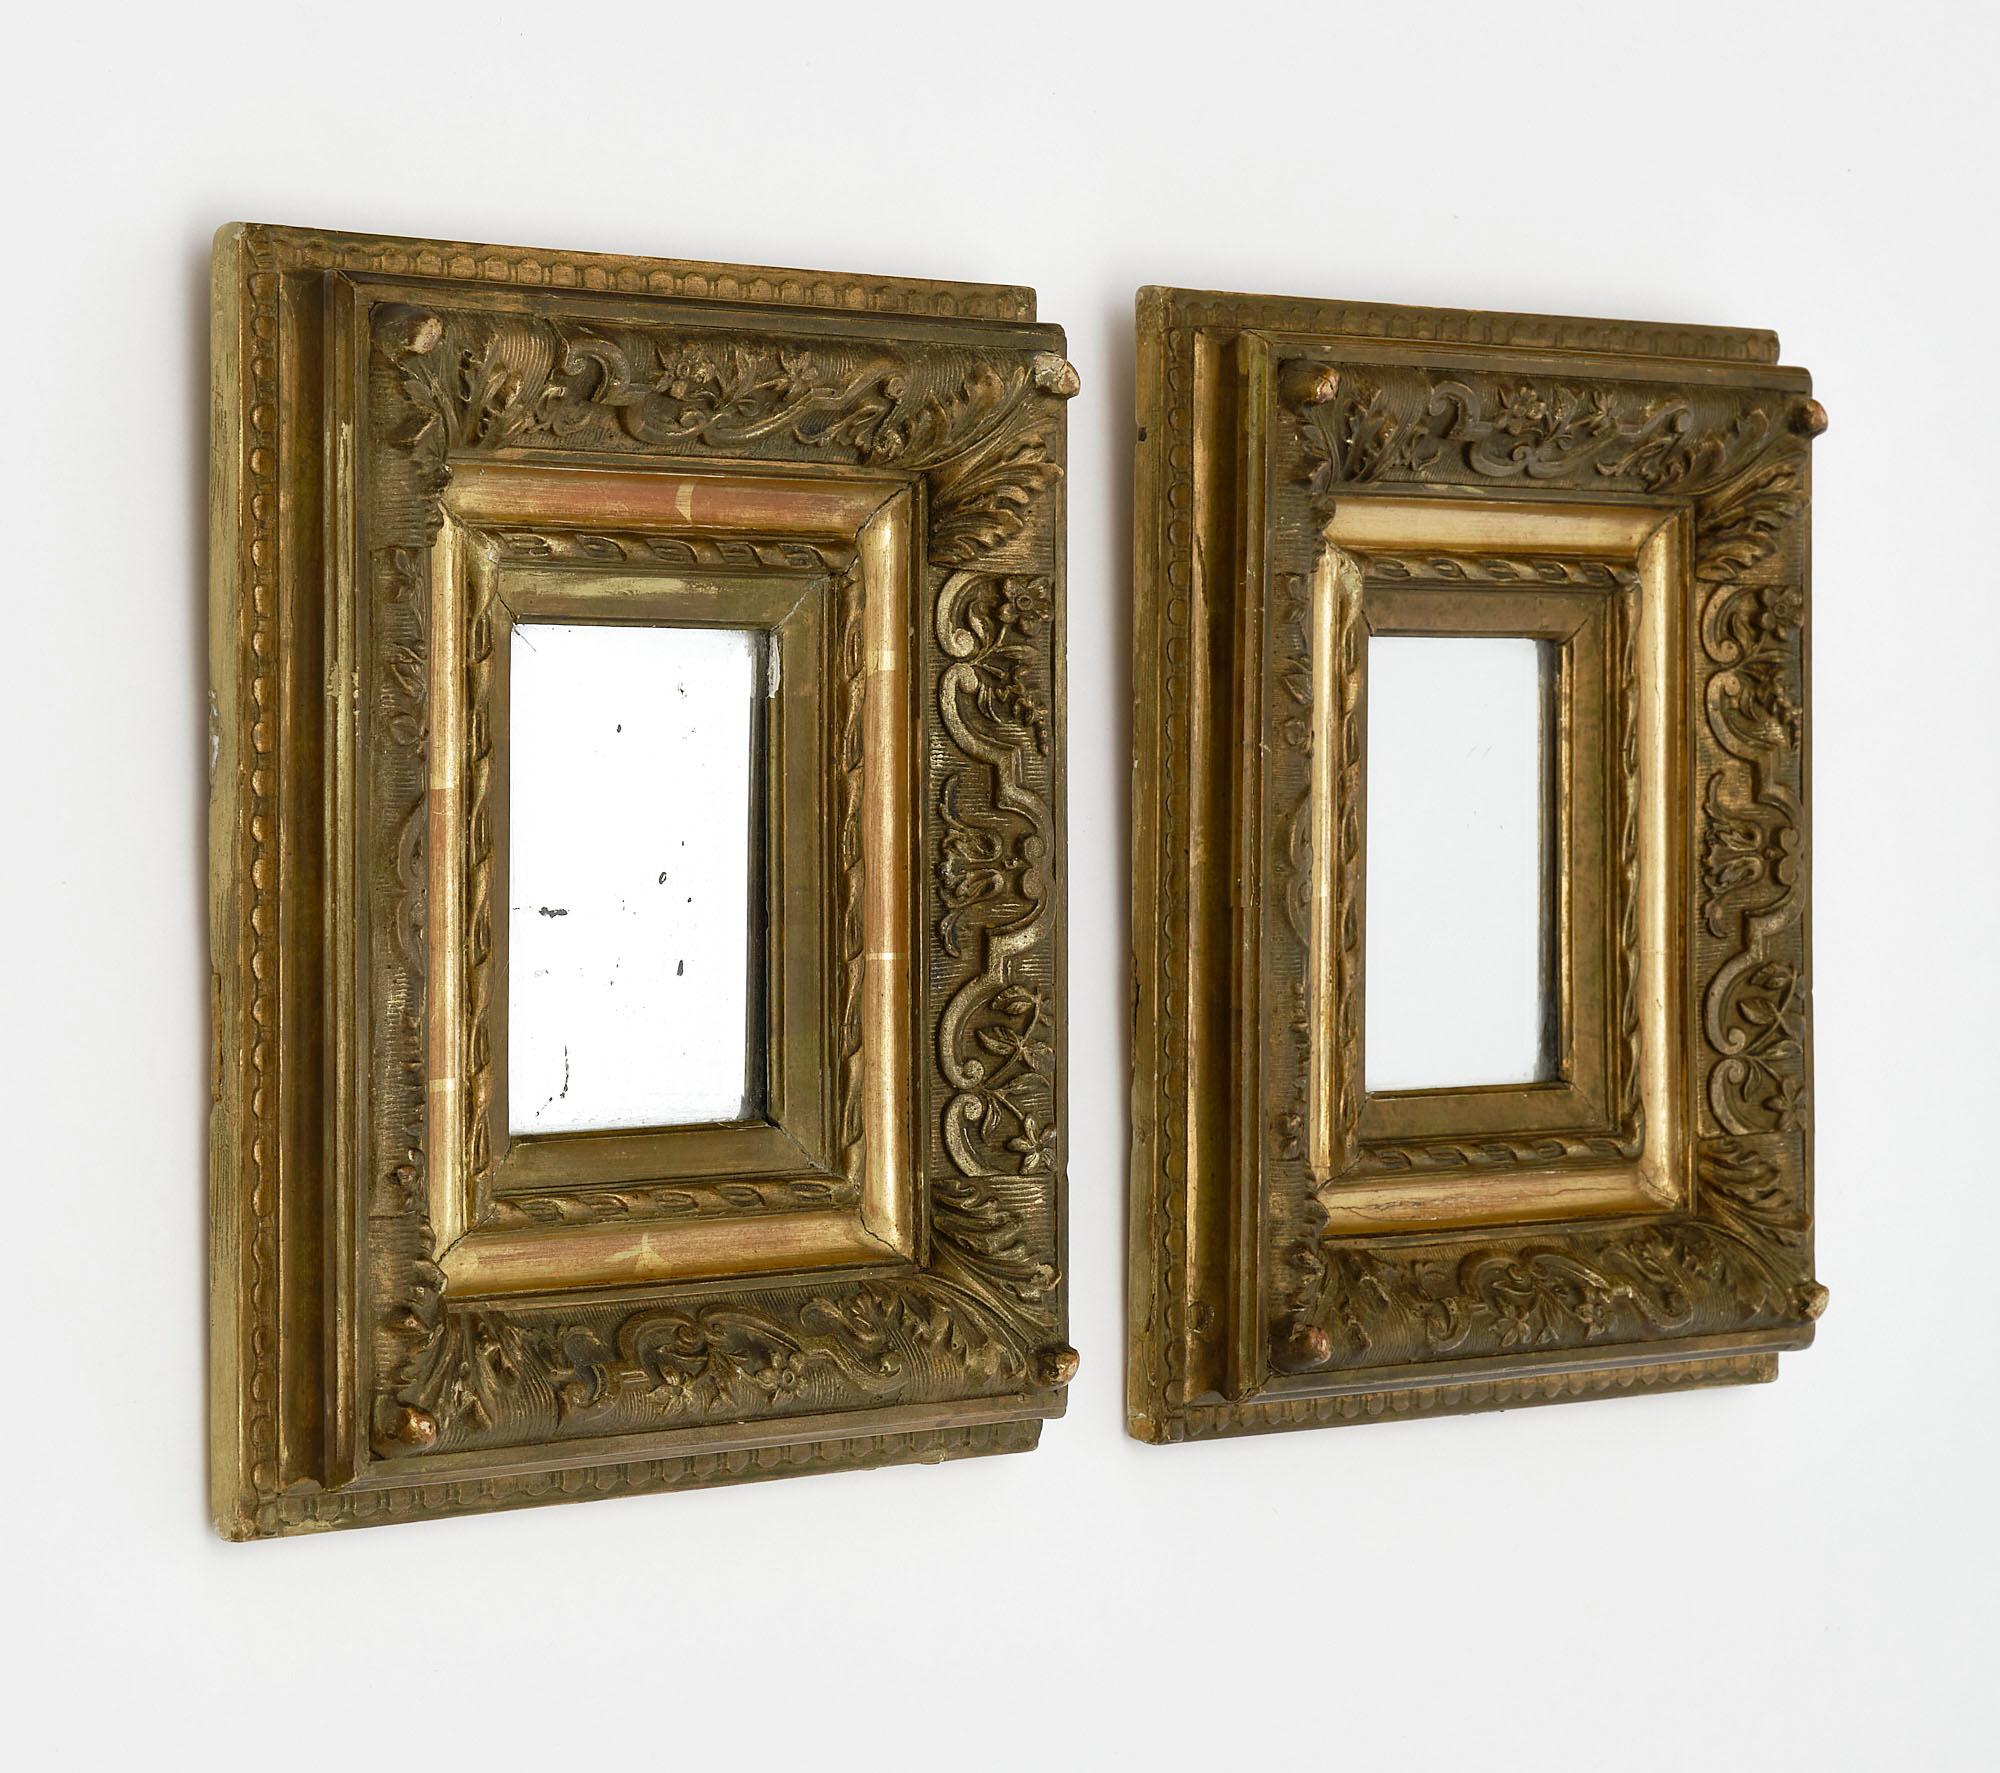 Pair of mirrors from France with hand-carved wooden frames and original 23 carat gold leafing. The interior mercury mirrors and beautiful patina are all original. The mirrors are beveled as well. We love the delicate size and striking French